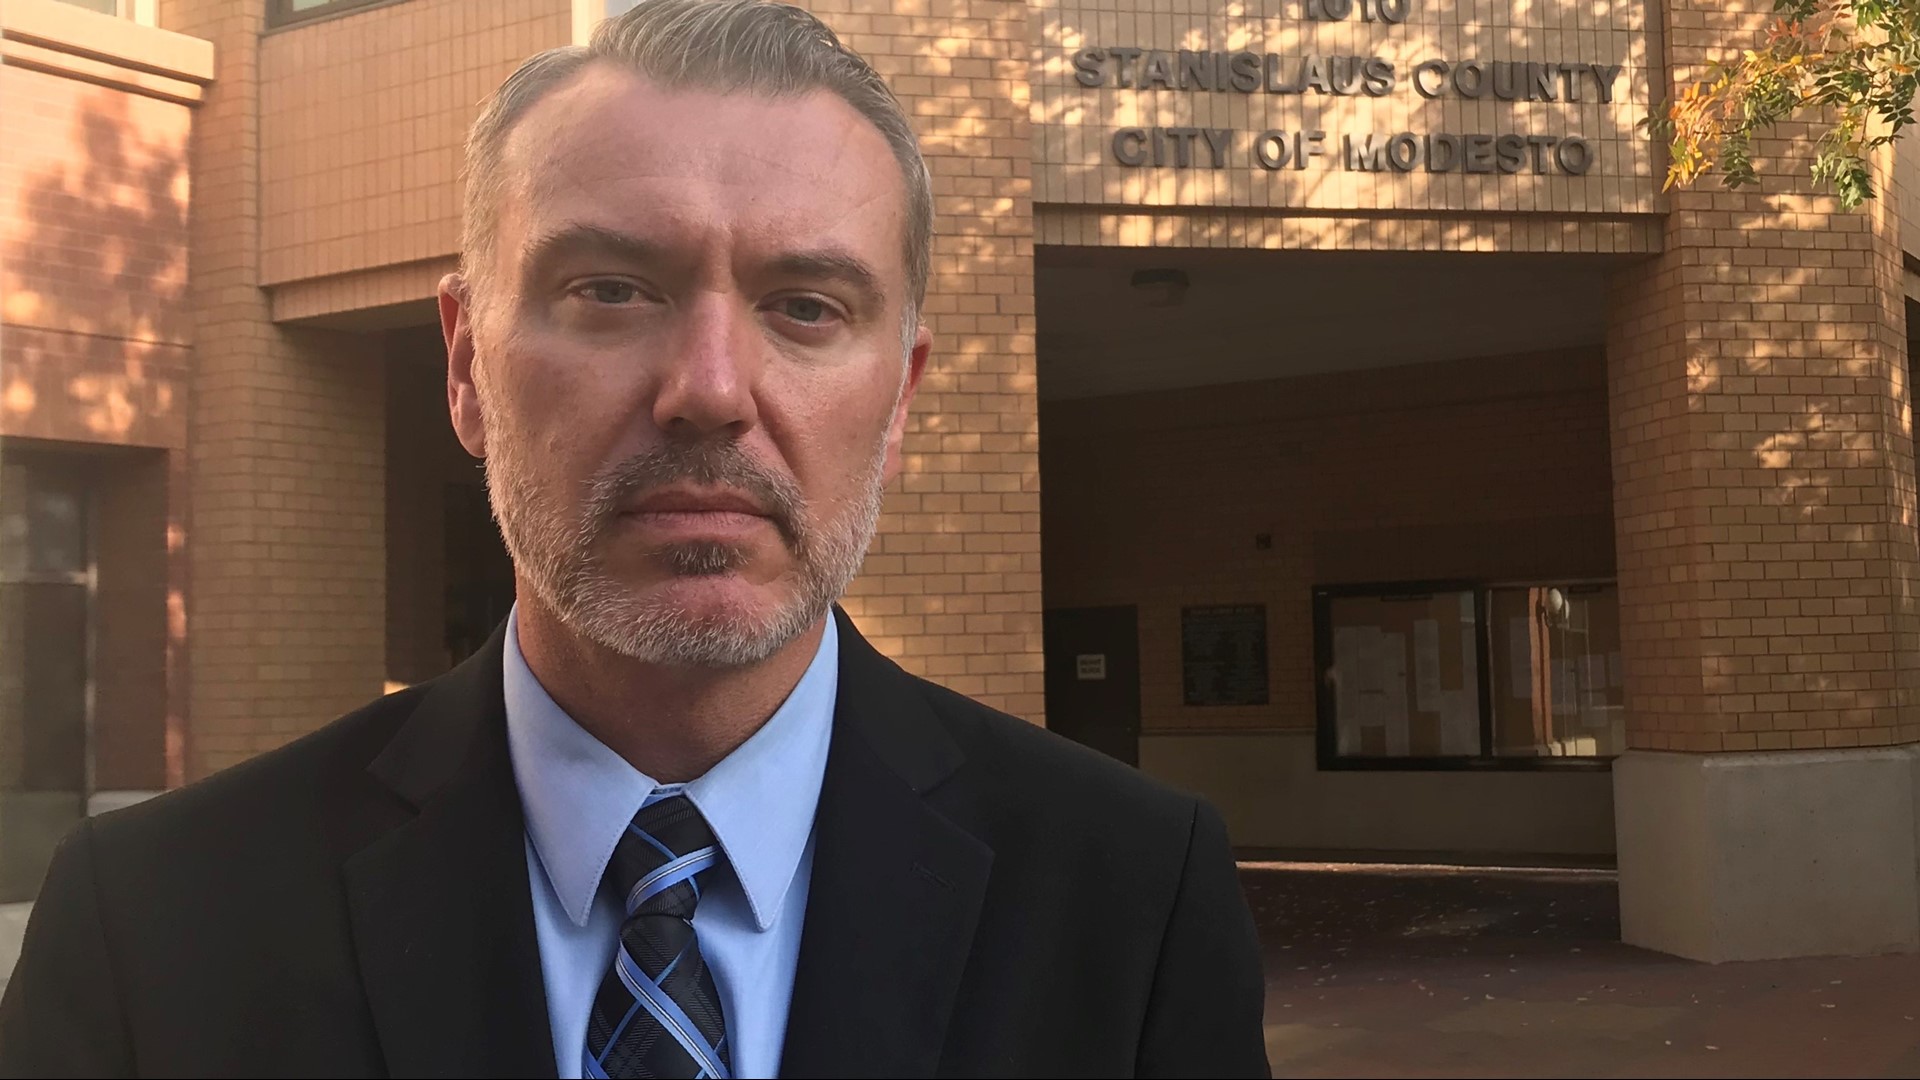 Modesto's tent city is coming to a close. It was a temporary yet successful experiment. Modesto spokesperson Thomas Reeves explains the closure.